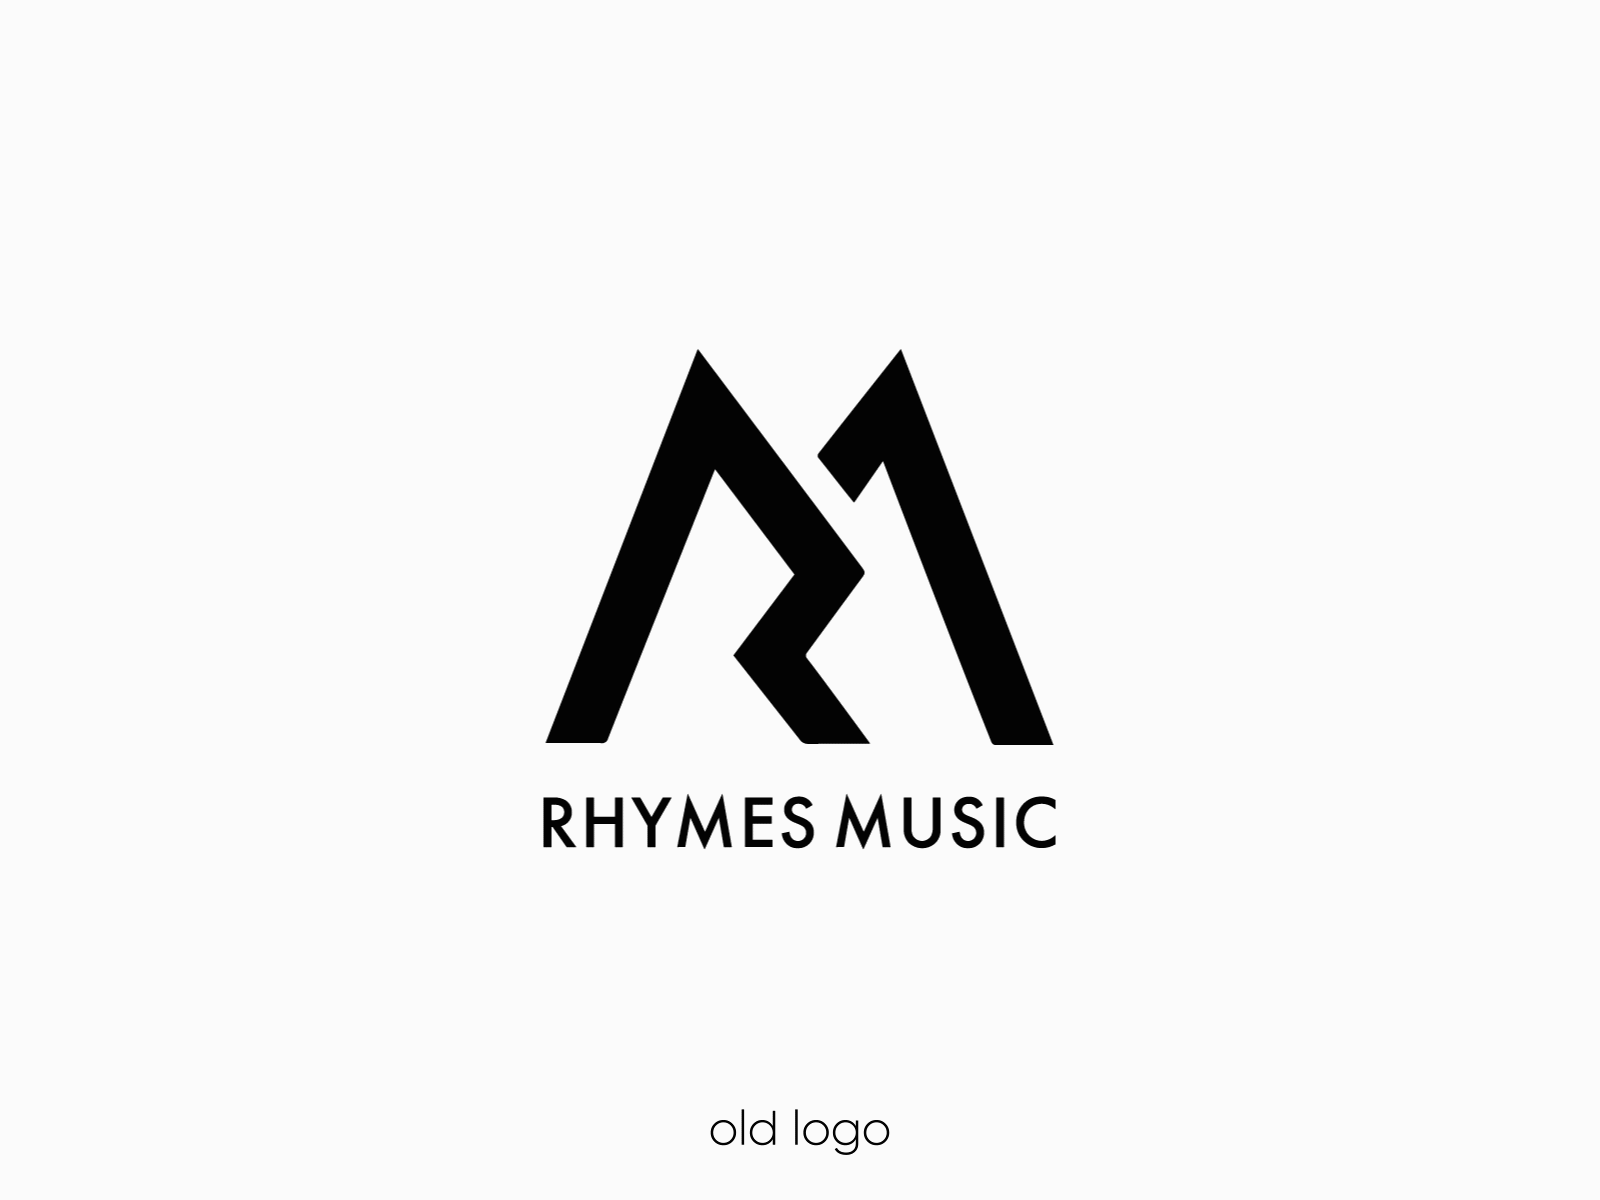 Logo update for Rhymes Music